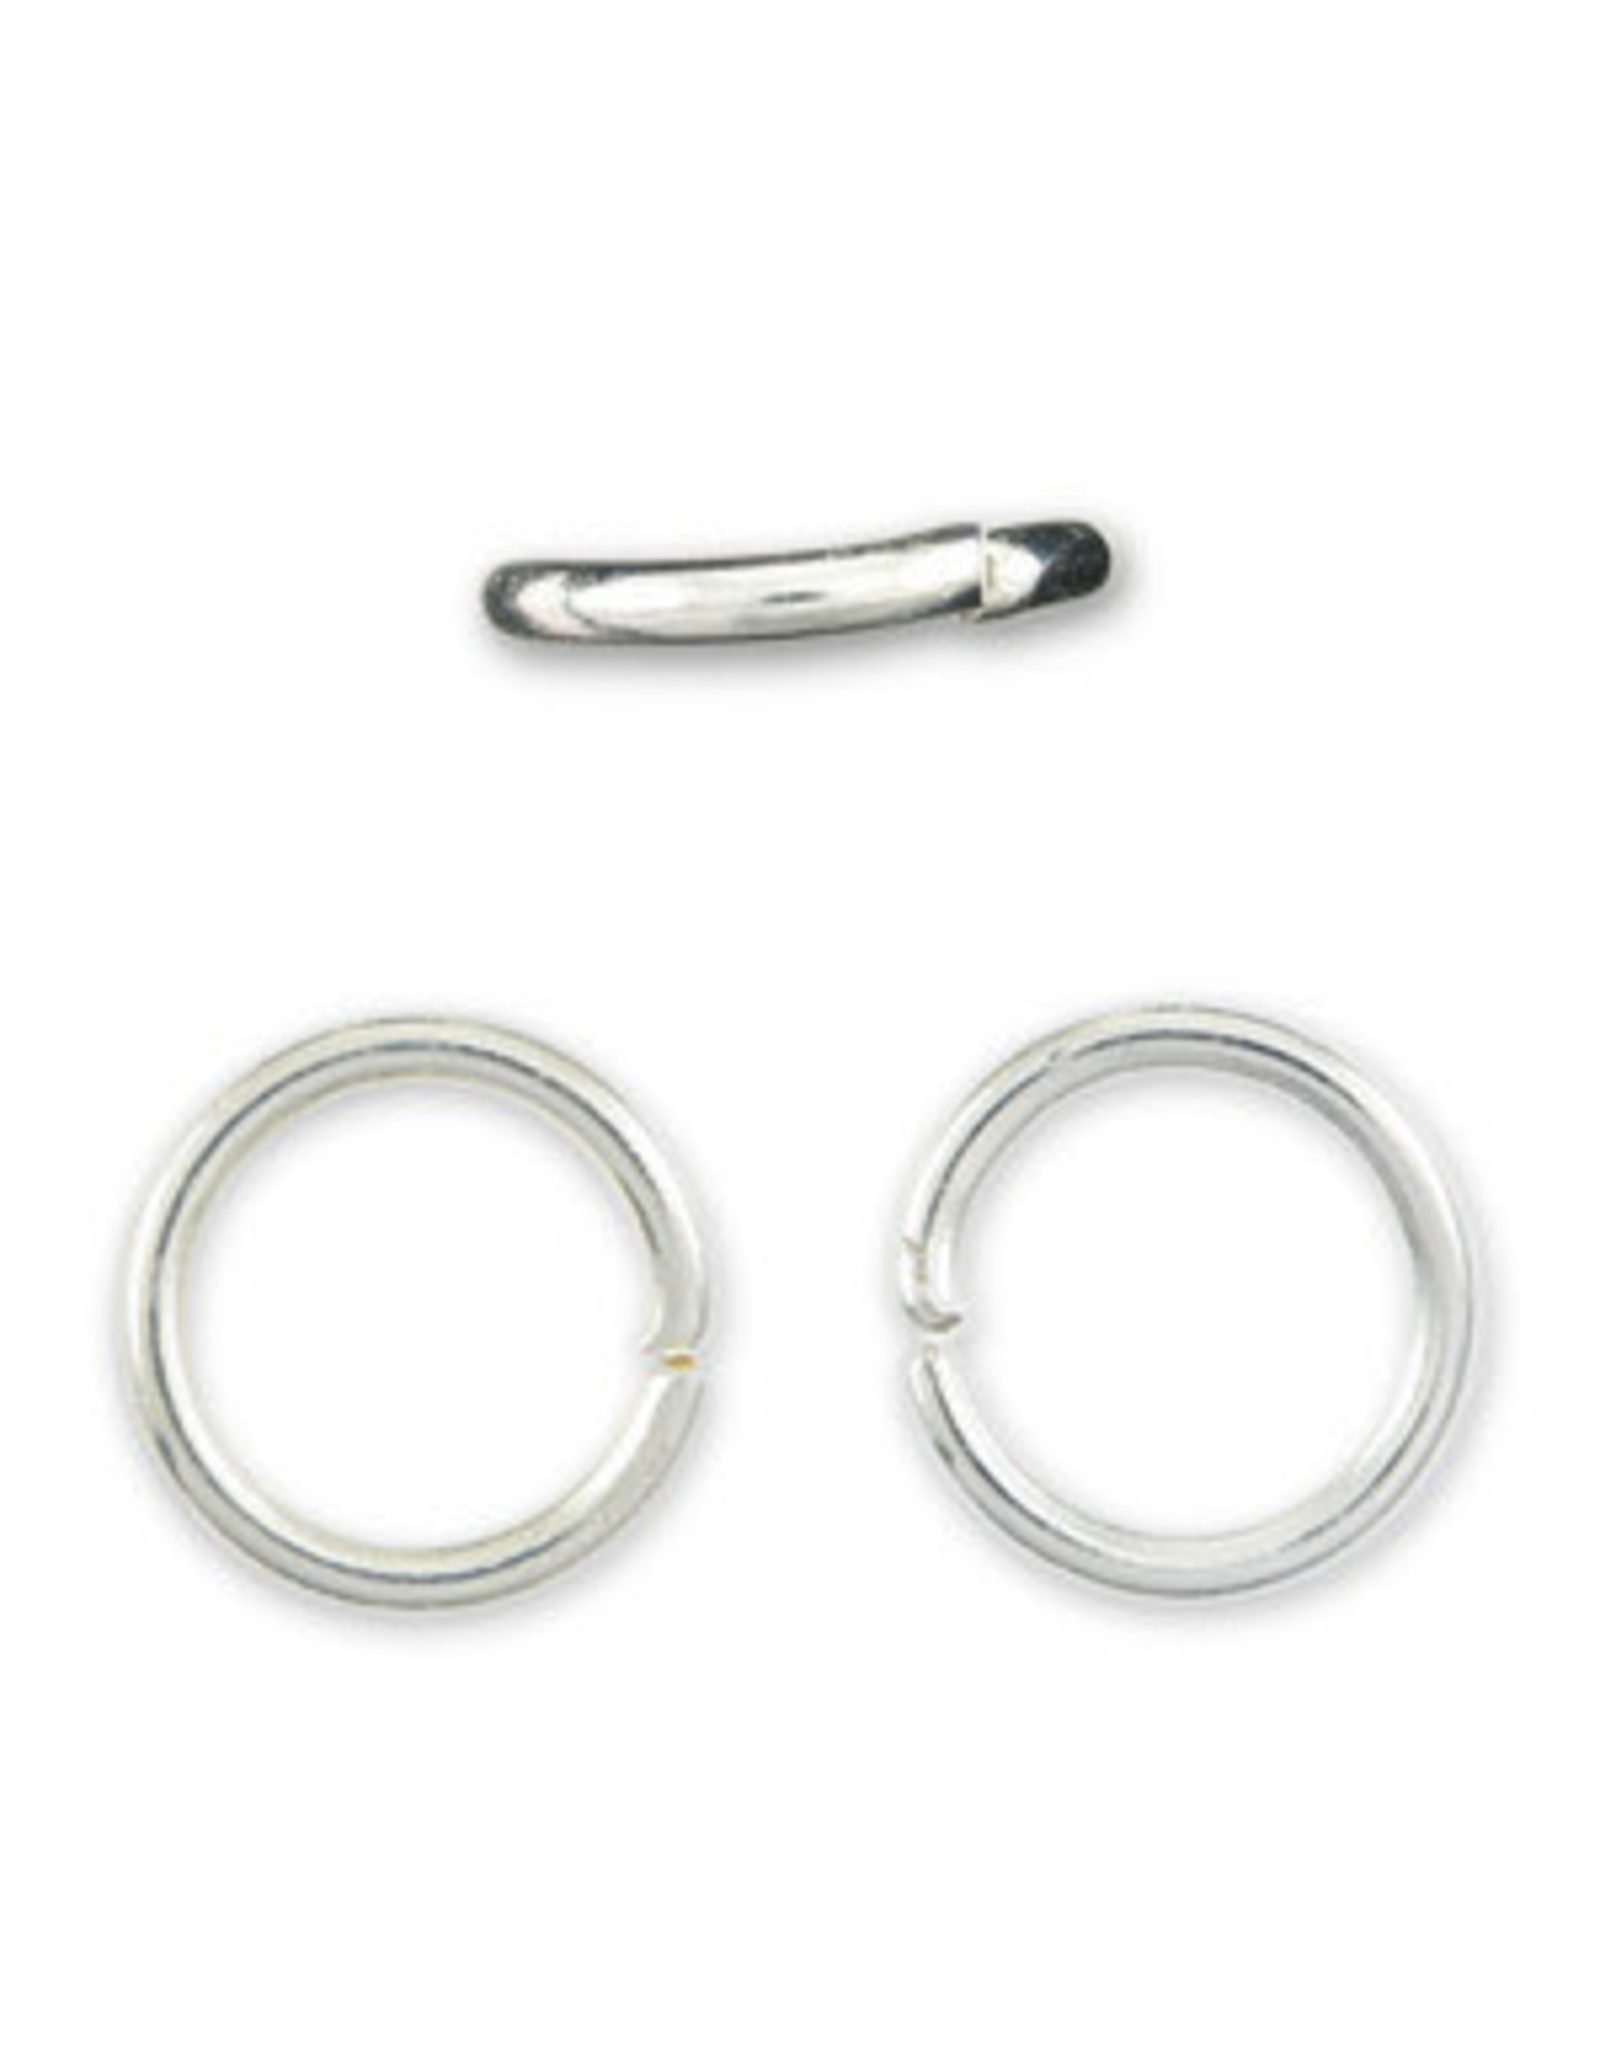 Jump Ring 10mm Silver  approx 16g  x50 NF